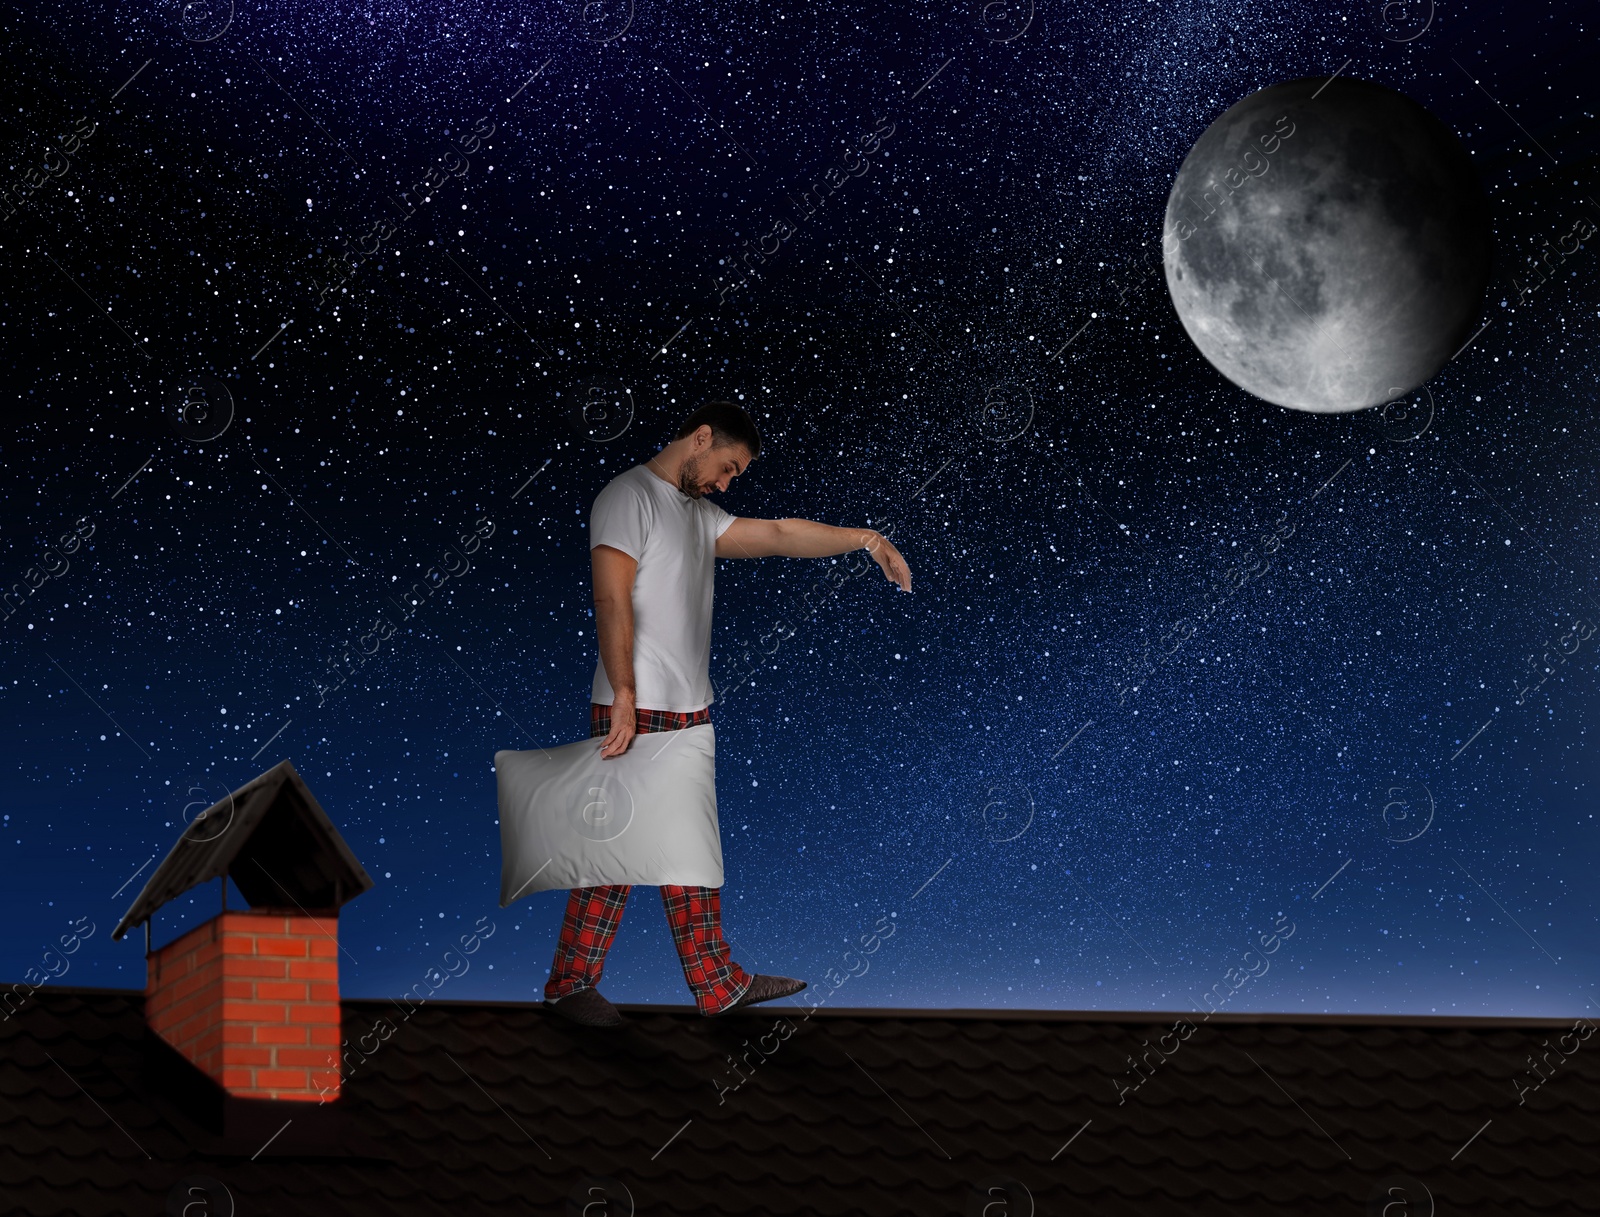 Image of Sleepwalker wearing pajamas with pillow on roof in night